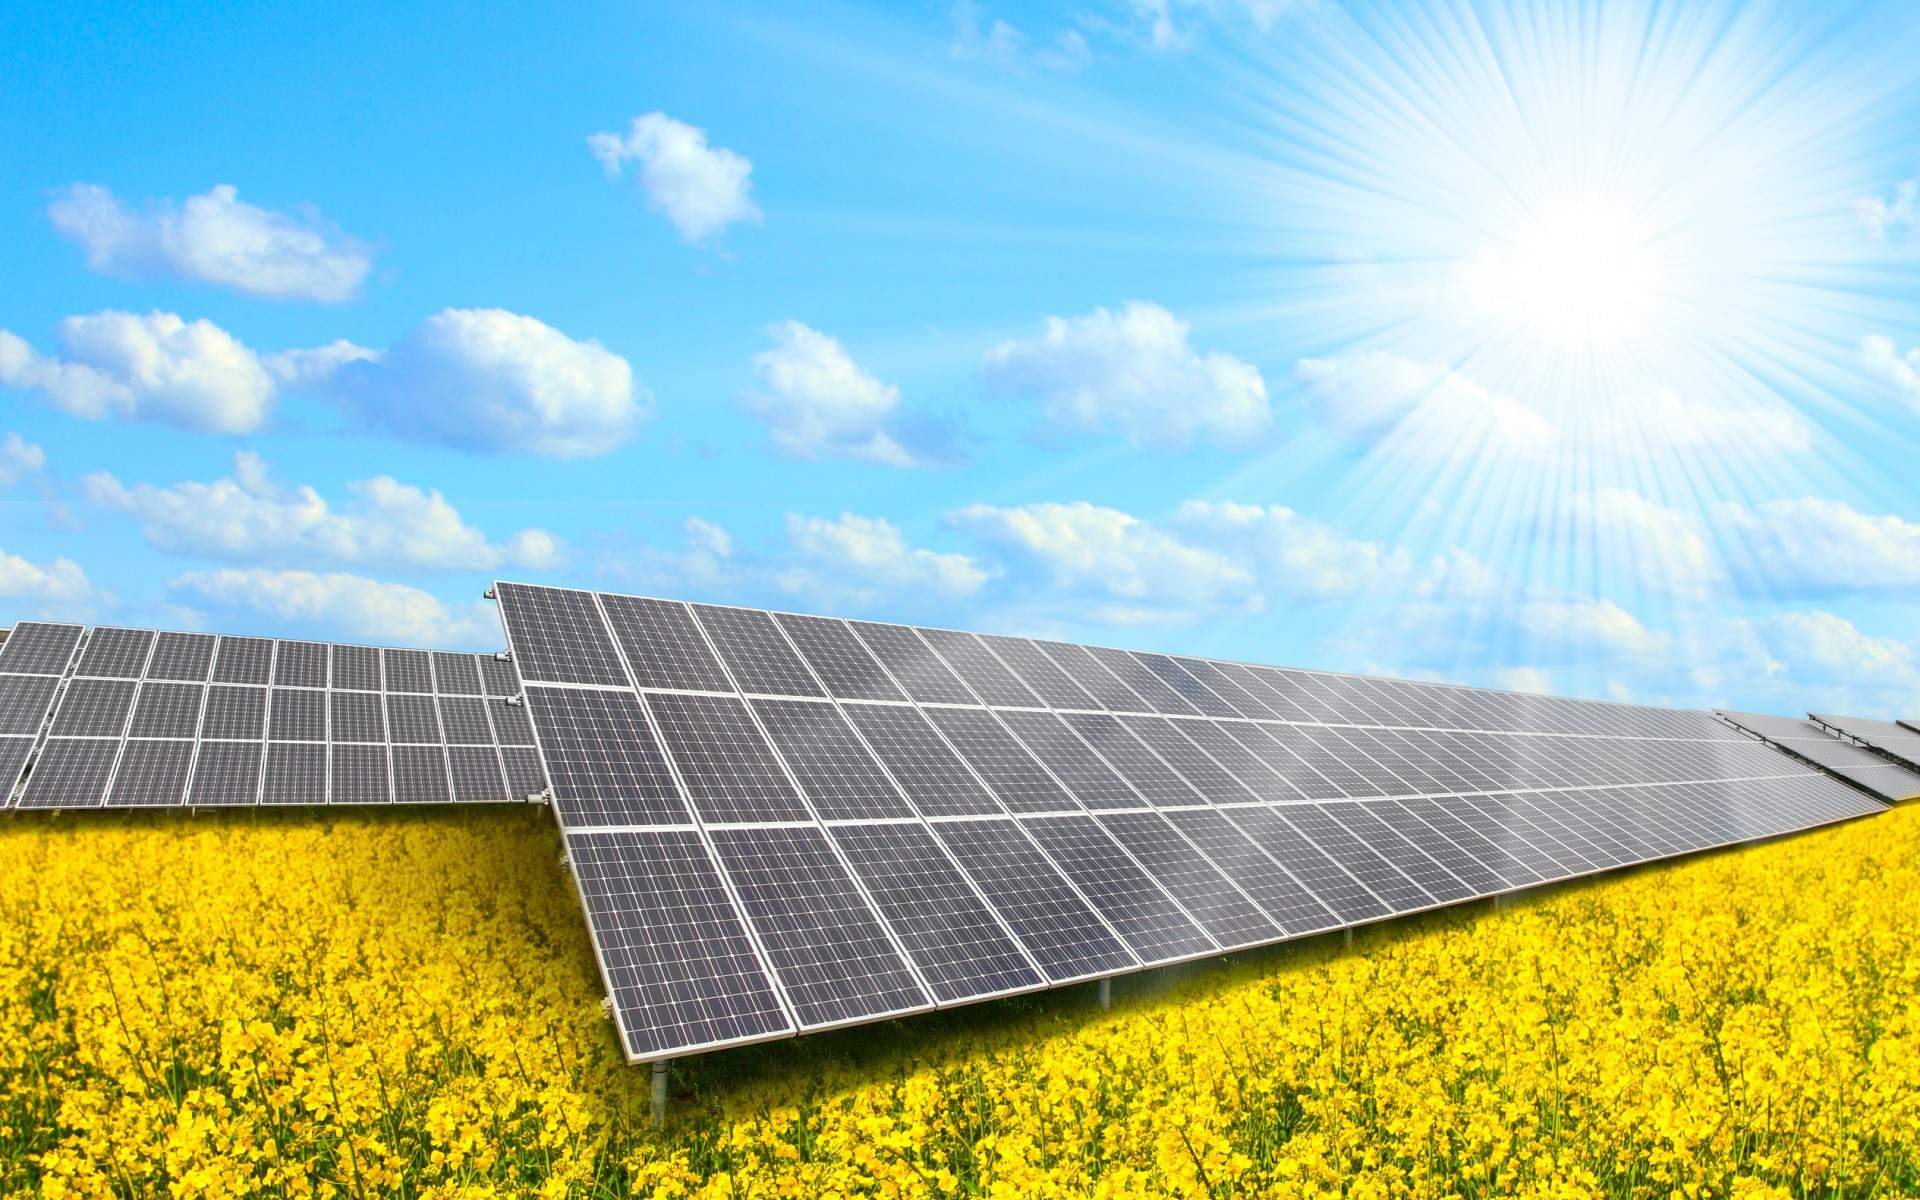 Download wallpapers Solar panels, field, sun, Solar Power System for desktop with resolution